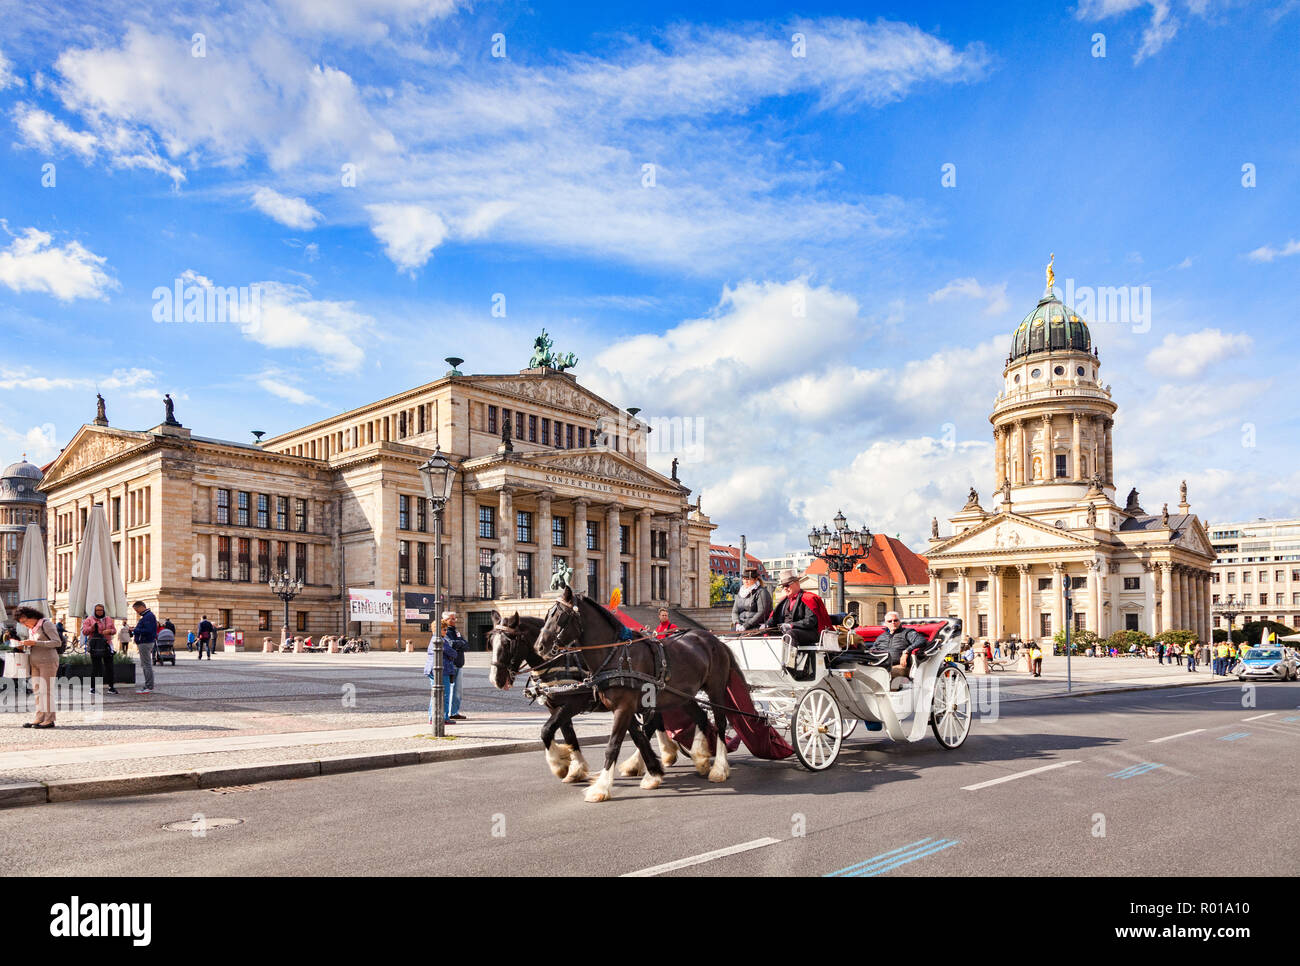 22 September 2018: Berlin, Germany - Horse-drawn carriage ride in Gendarmenmarkt Square, with the Konzerthaus on the left and the French Church on the Stock Photo